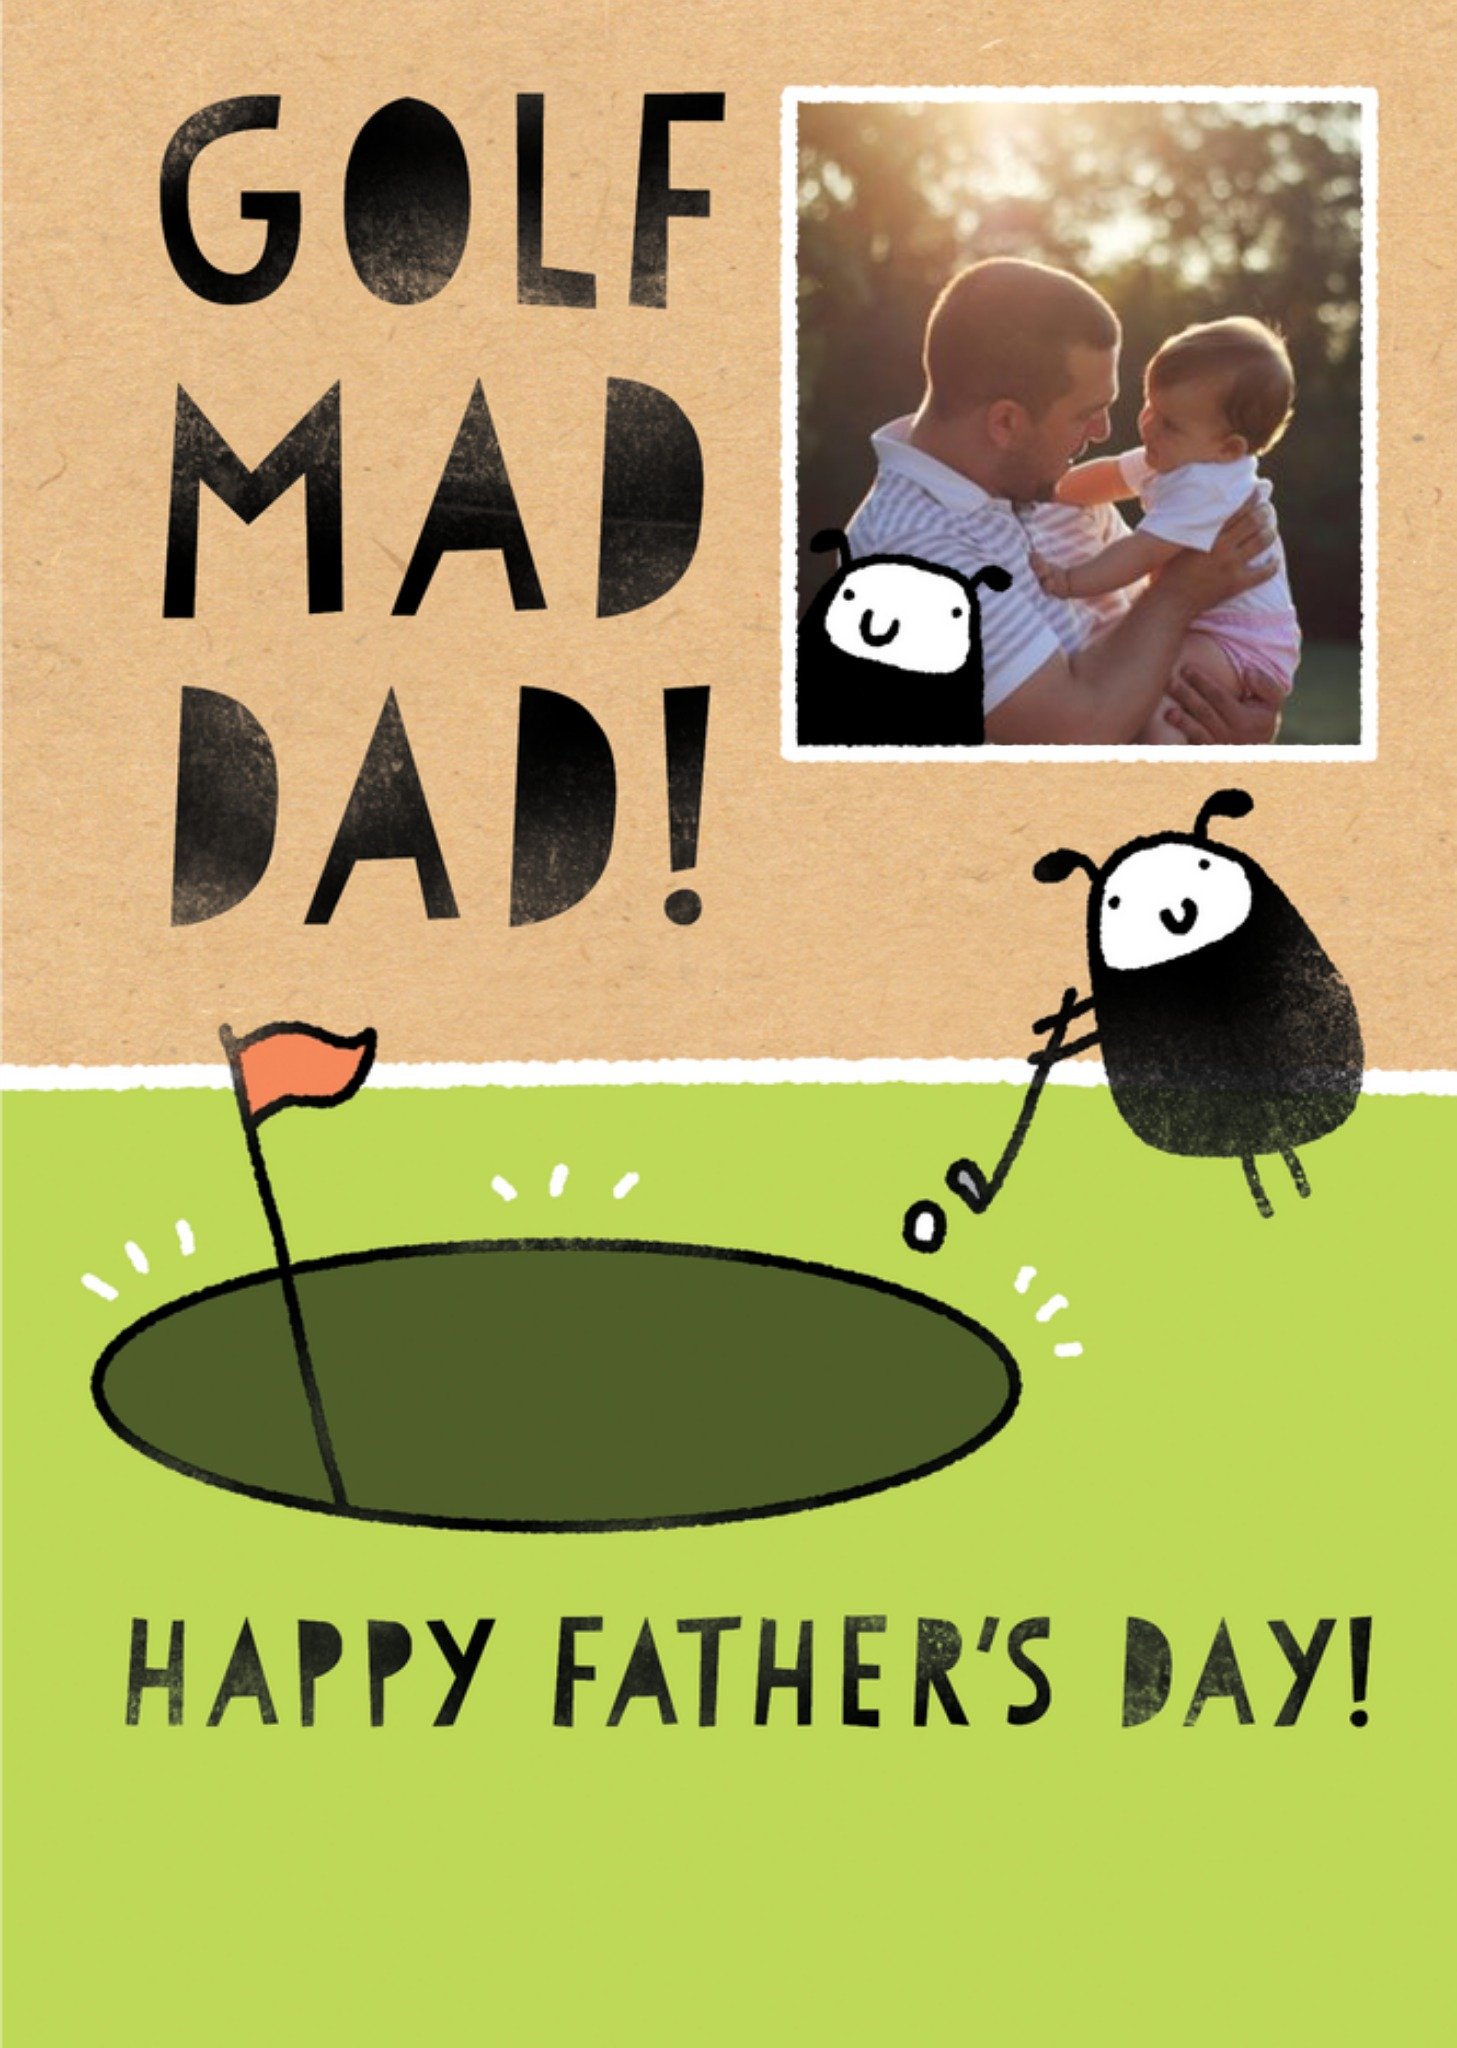 Moonpig Cute Illustration Of A Sheep Playing Golf Golf Mad Dad Personalised Fathers Card Day Ecard